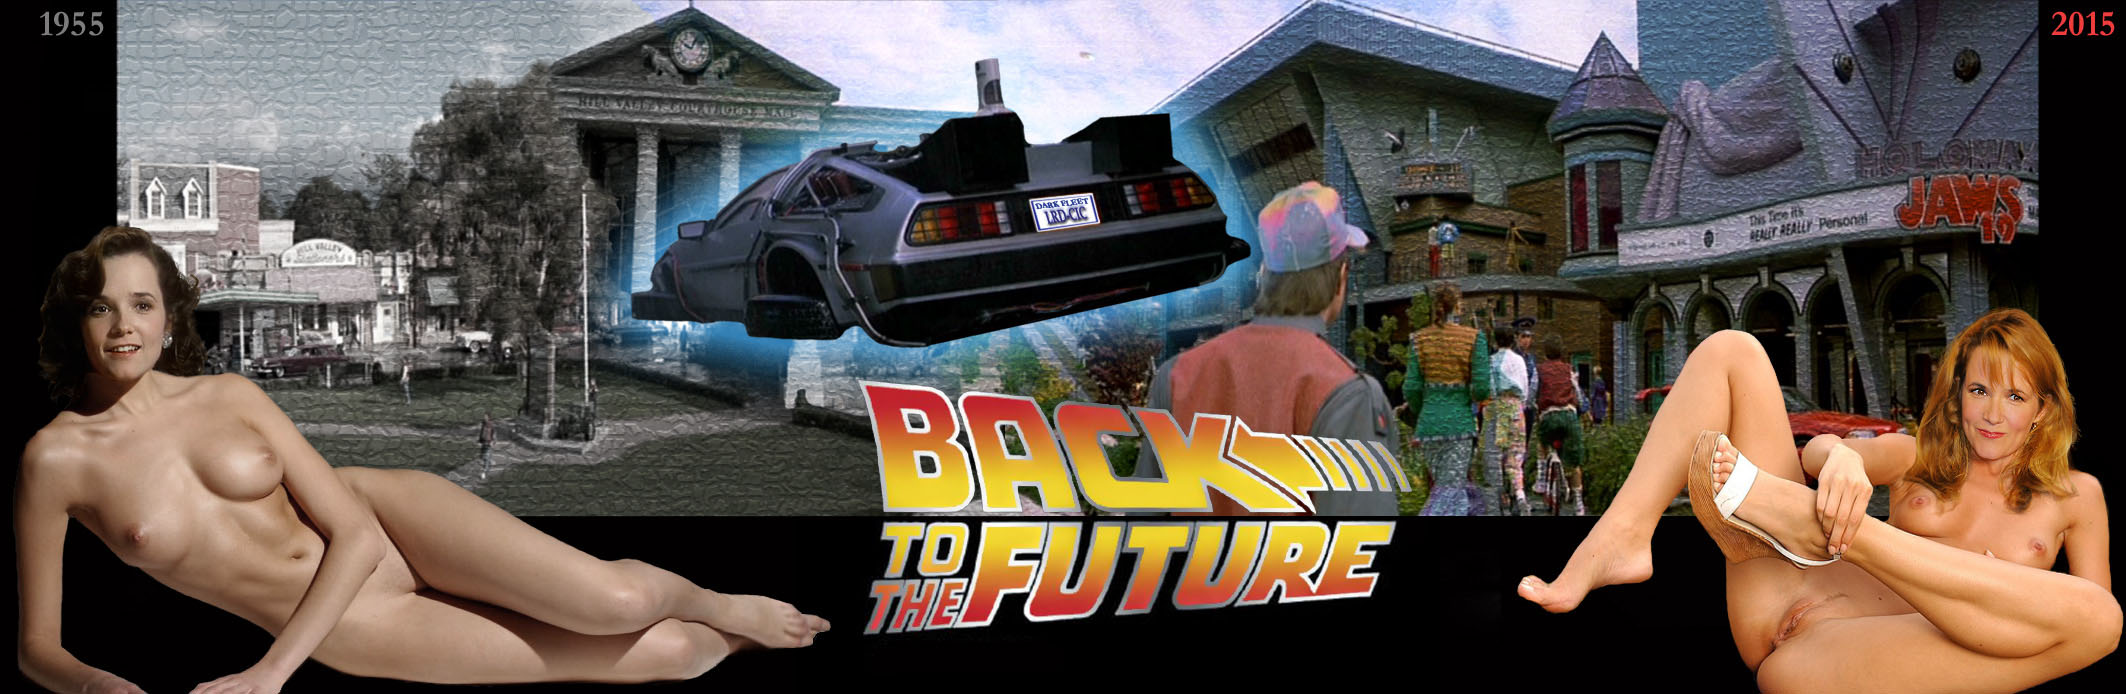 Realbooru - Free Porn Videos and Movies - XXX Teens. back_to_the_future cel...